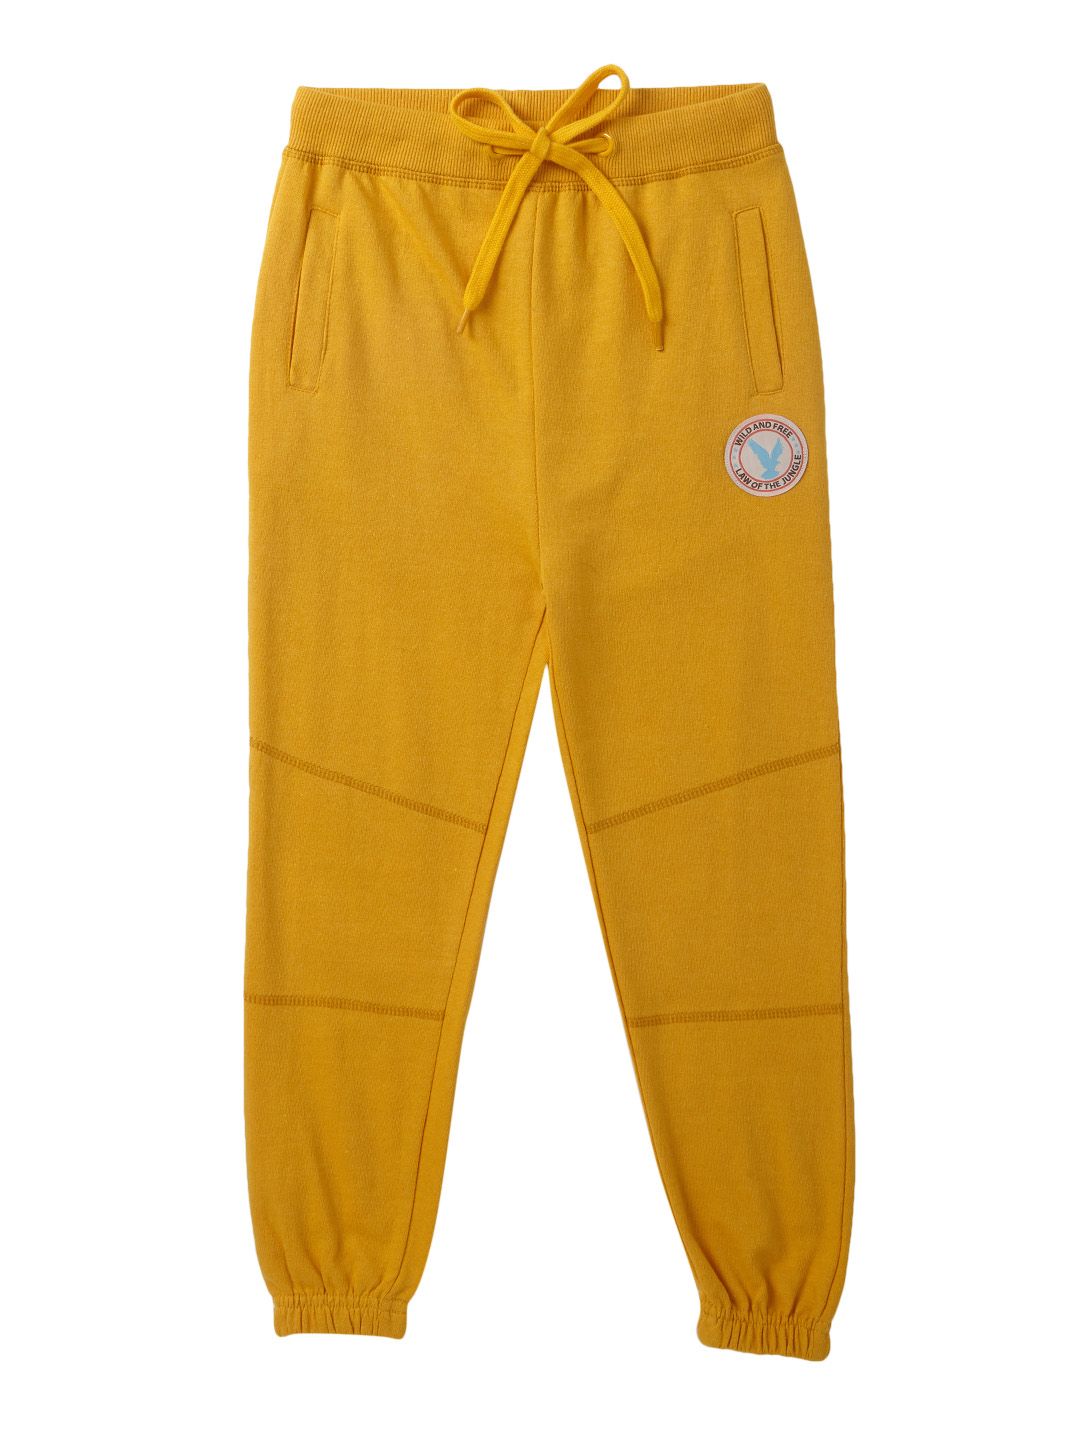 Boys Cotton Track Pant (Mustard , 4-12 years)